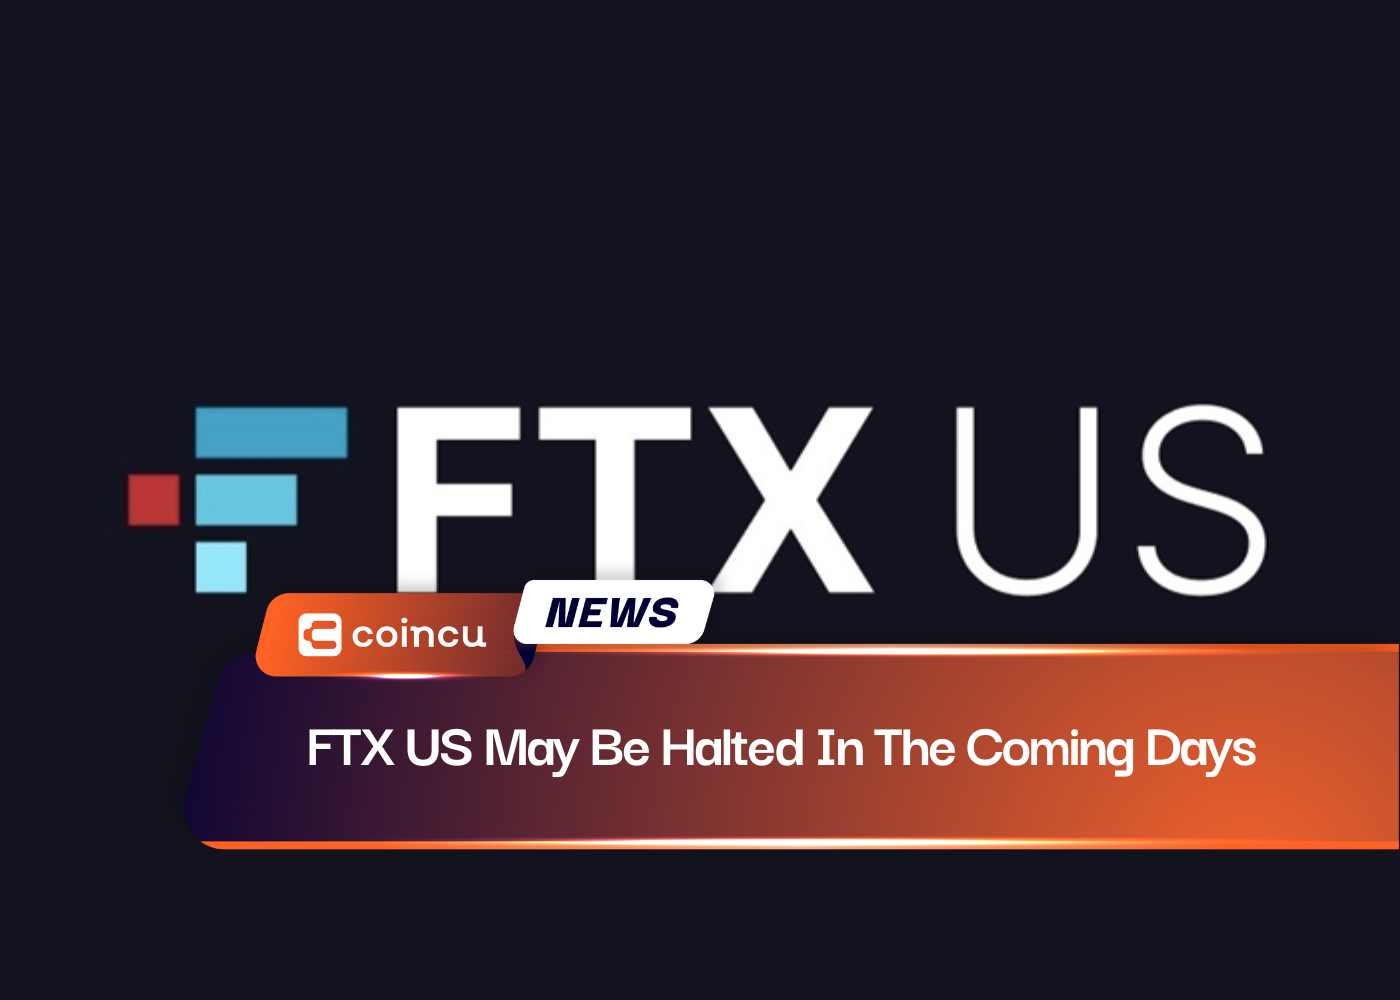 FTX US May Be Halted In The Coming Days